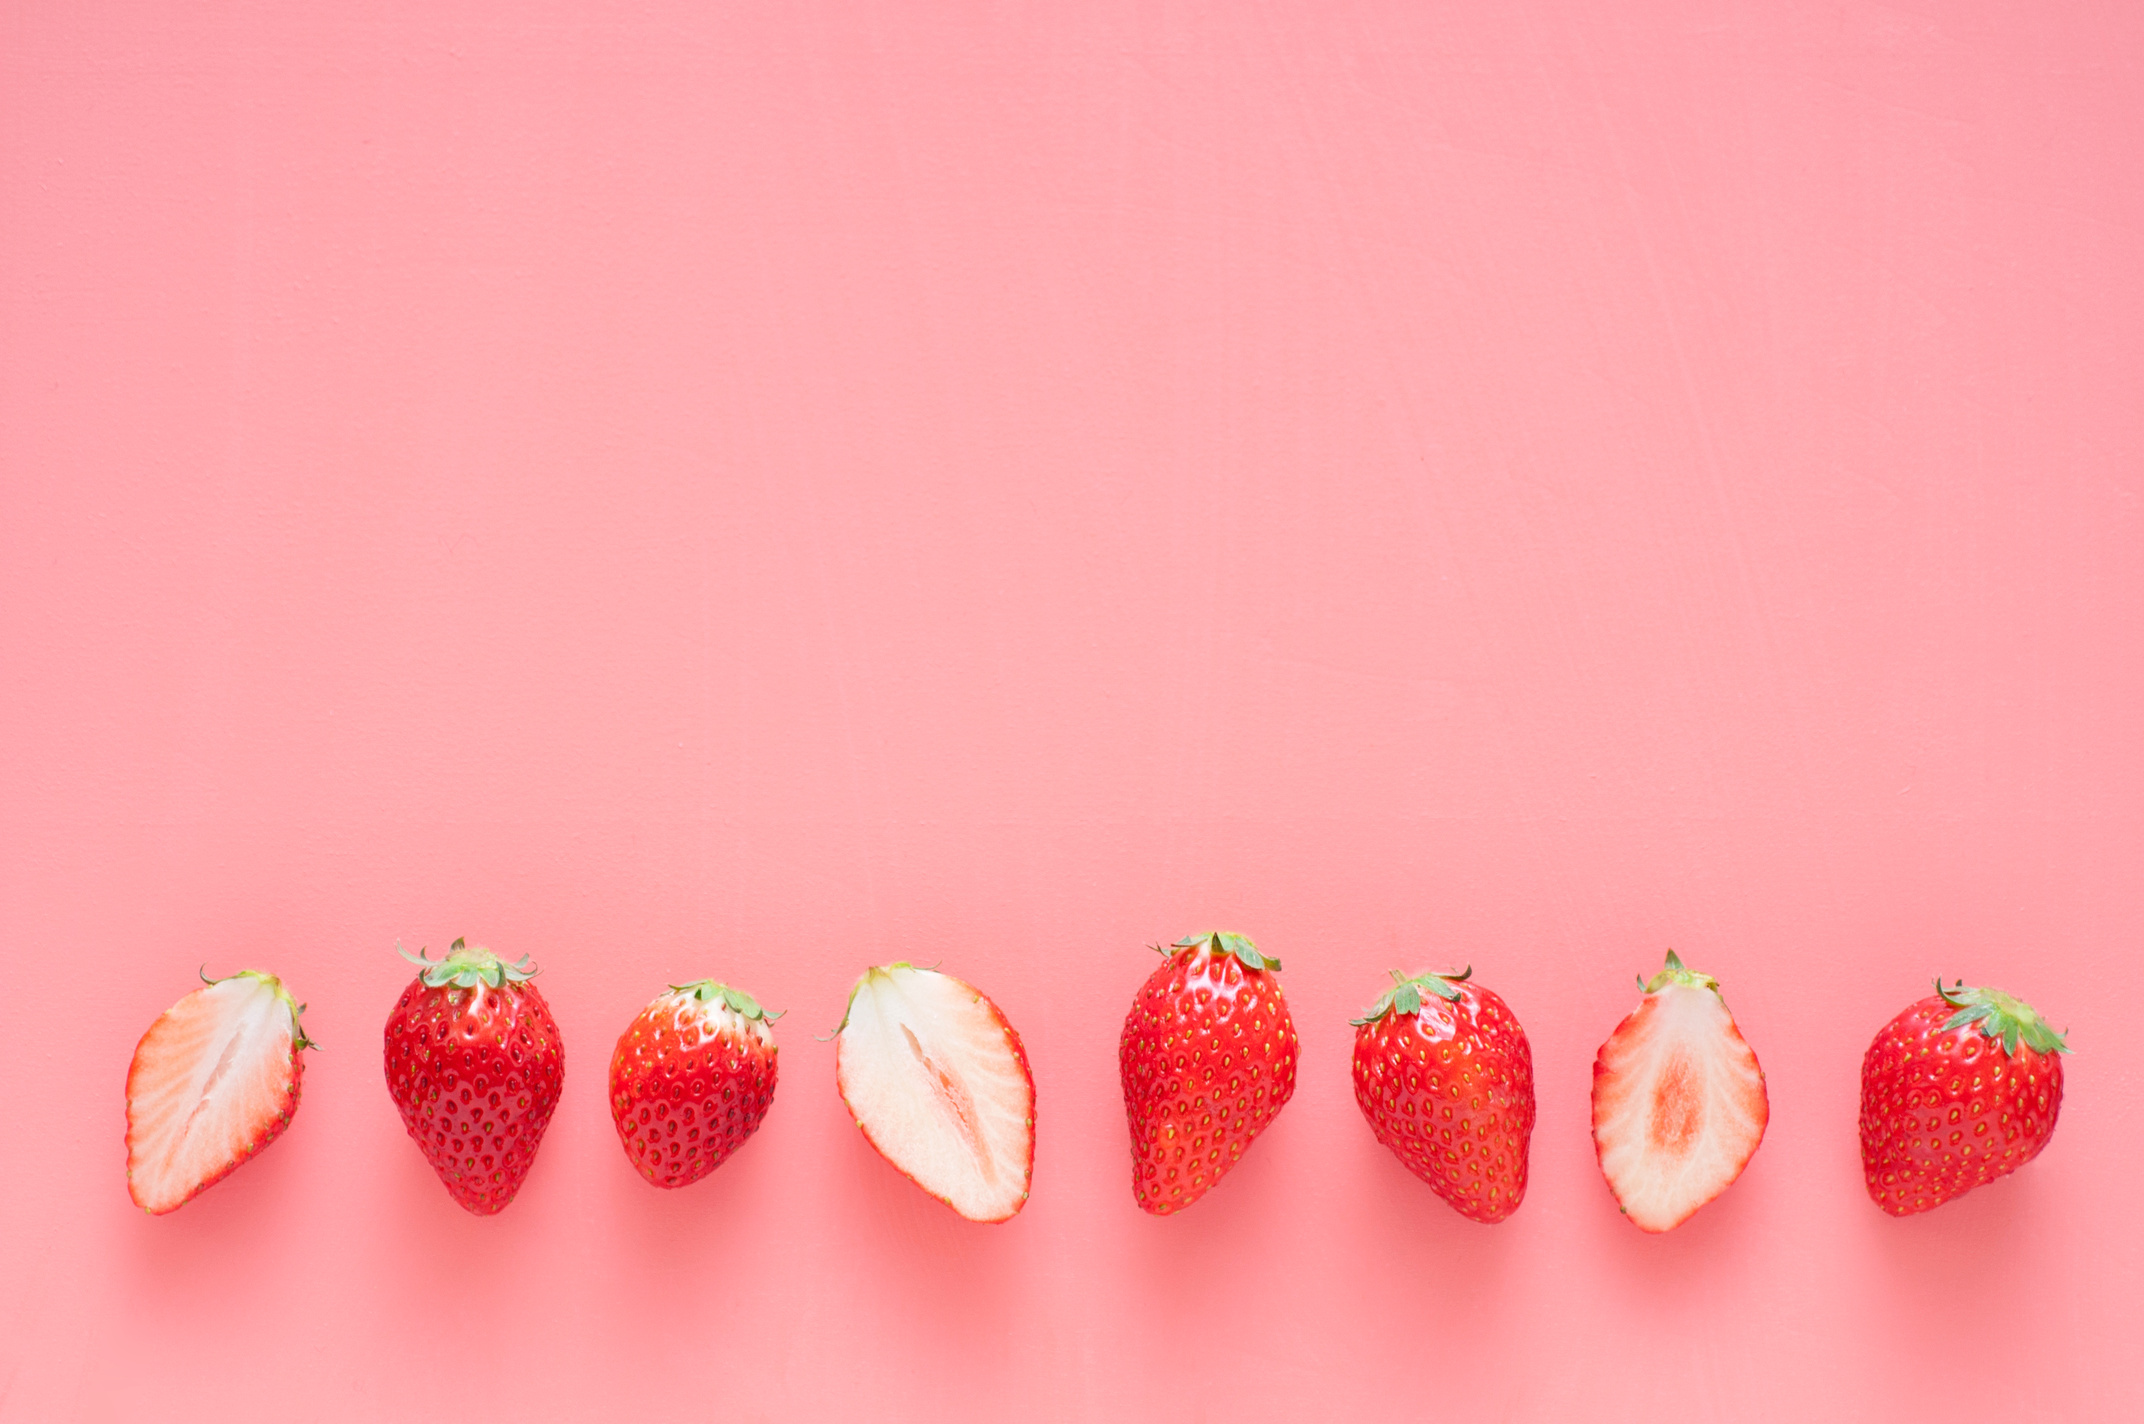 Strawberry on pink background